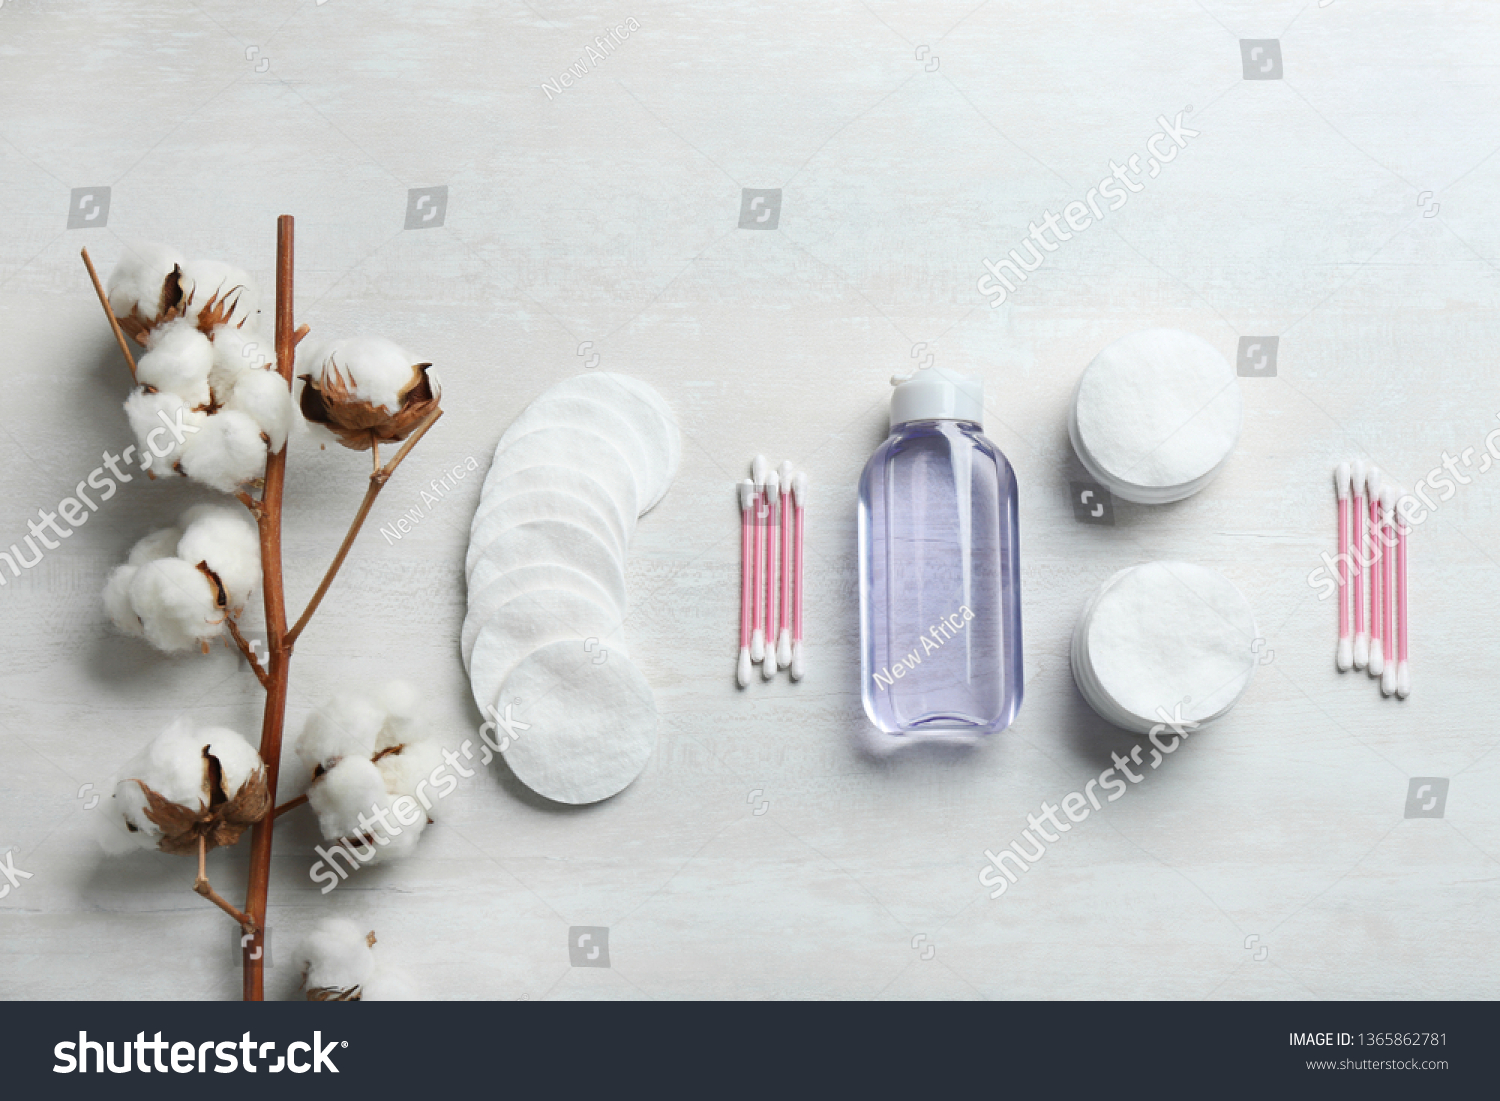 Flat lay composition with cotton hygienic products on light background #1365862781